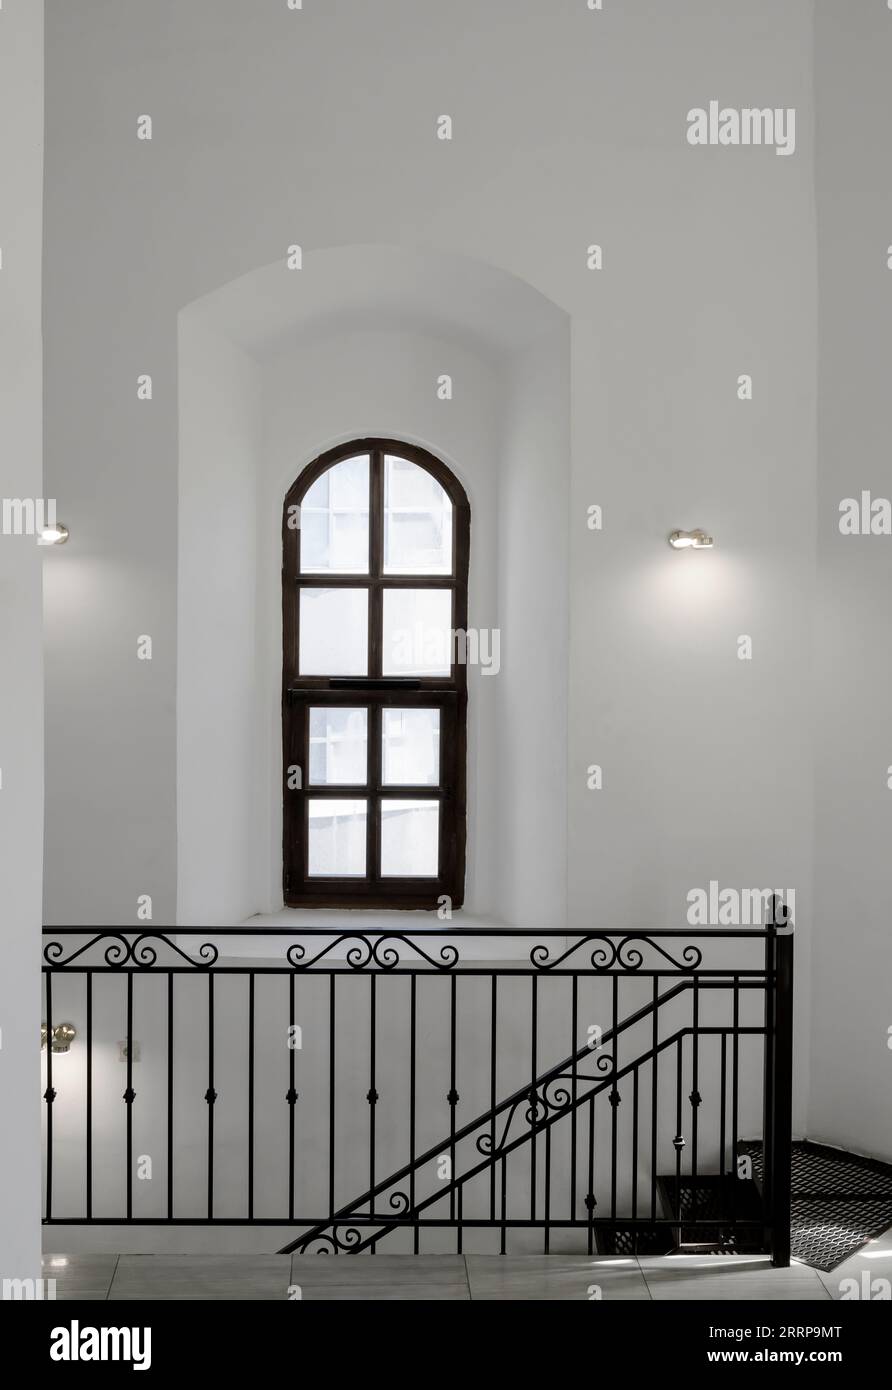 White walls with a black window frame and black iron railing stairs in the interior of a medieval bell tower Stock Photo